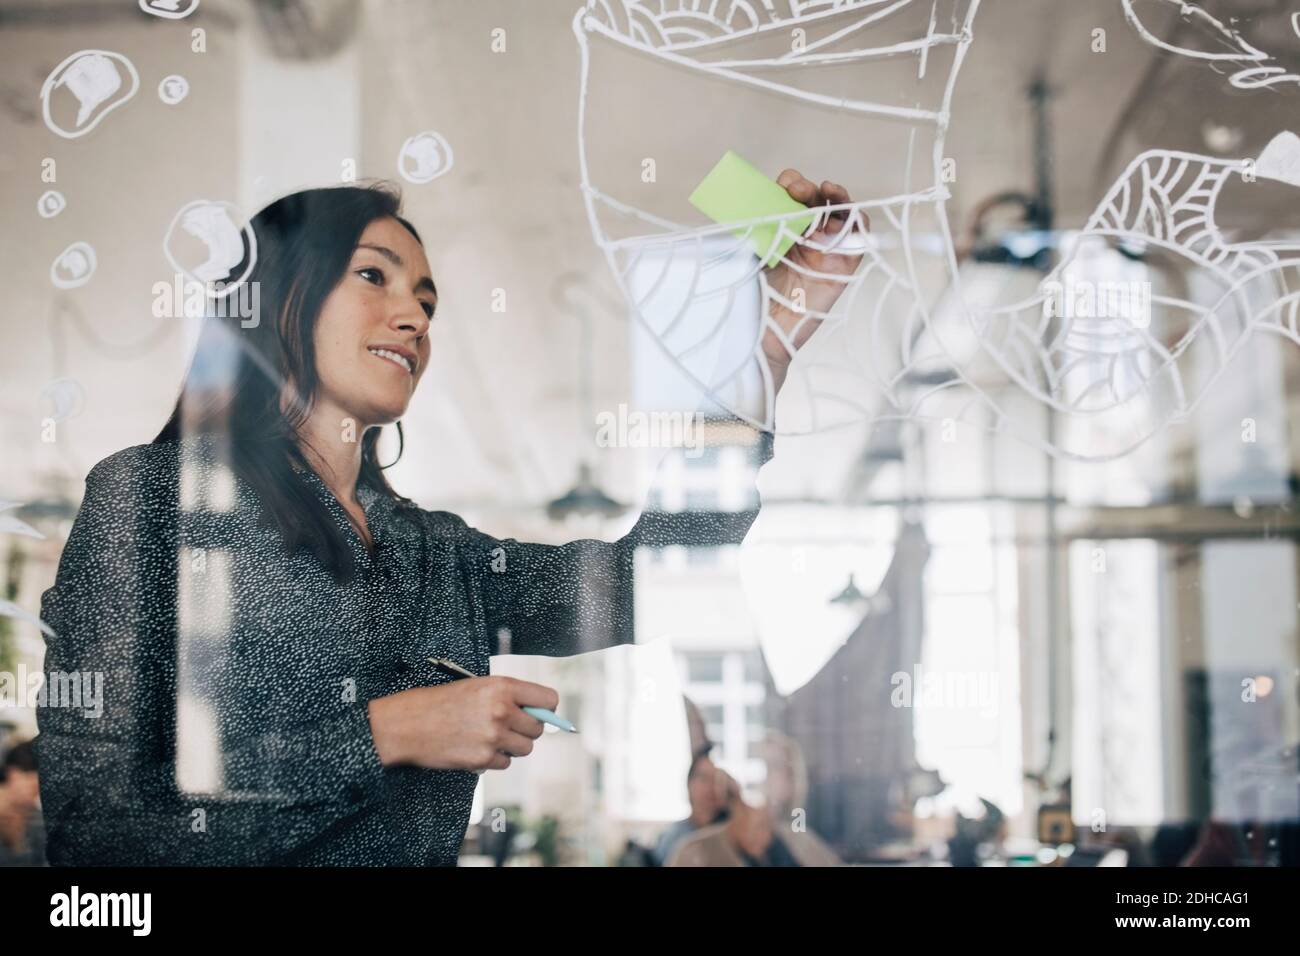 Creative businesswoman sticking adhesive note on patterned glass in office Stock Photo